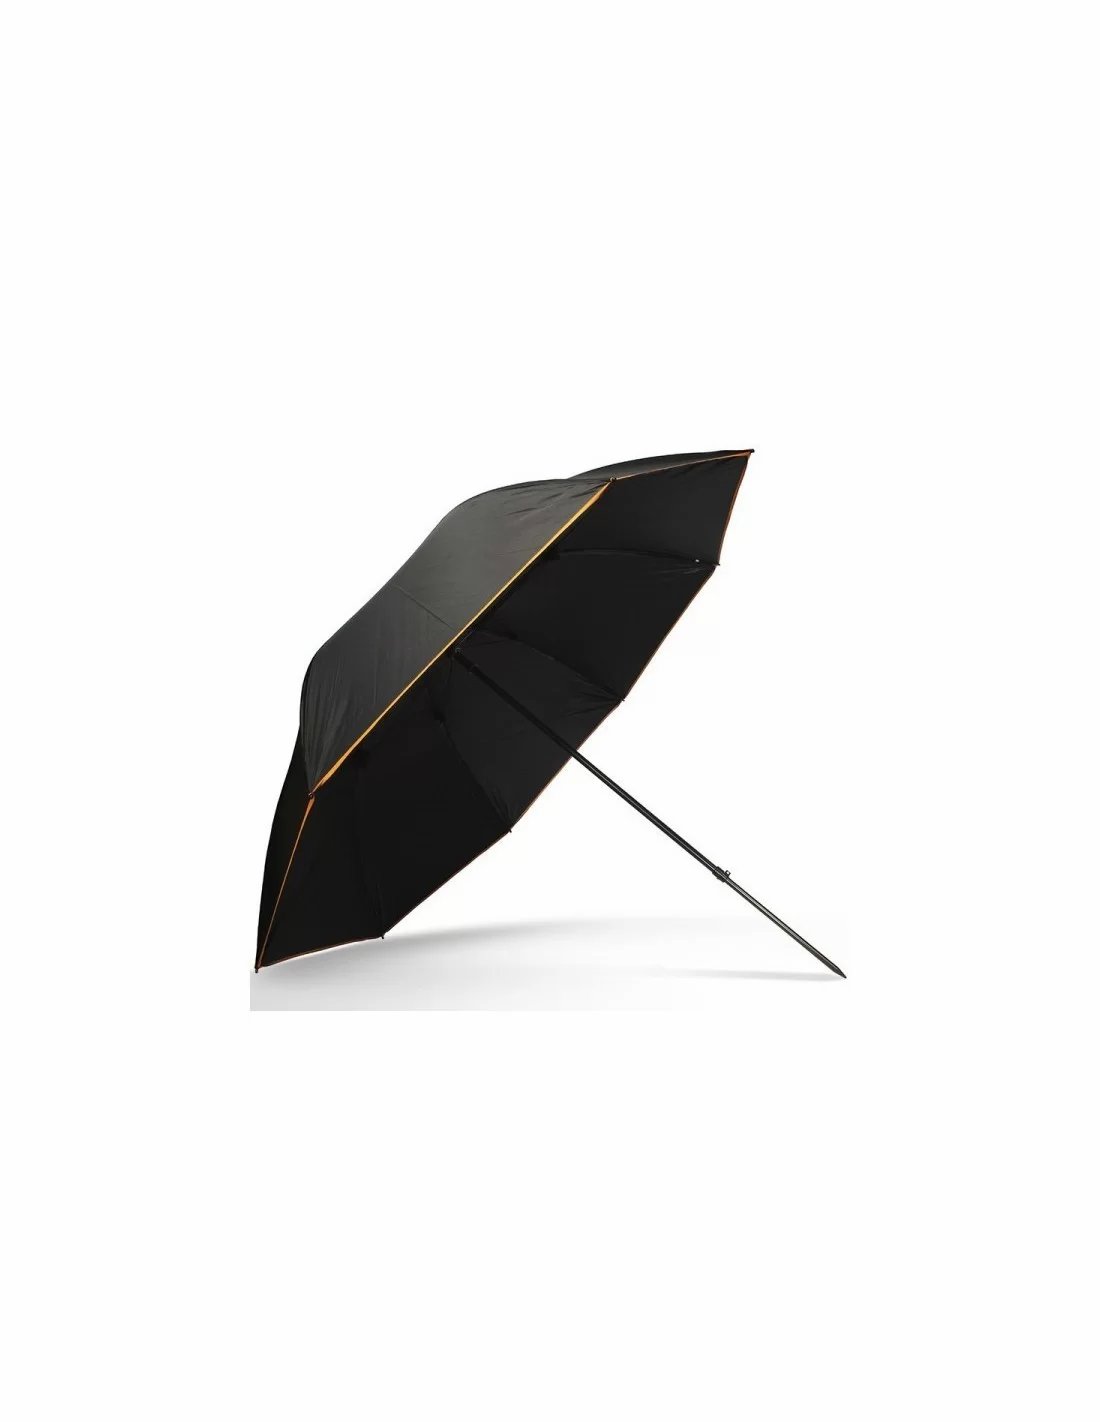 NGT 50" Deluxe Black Match Brolly with Tilt Function чадър